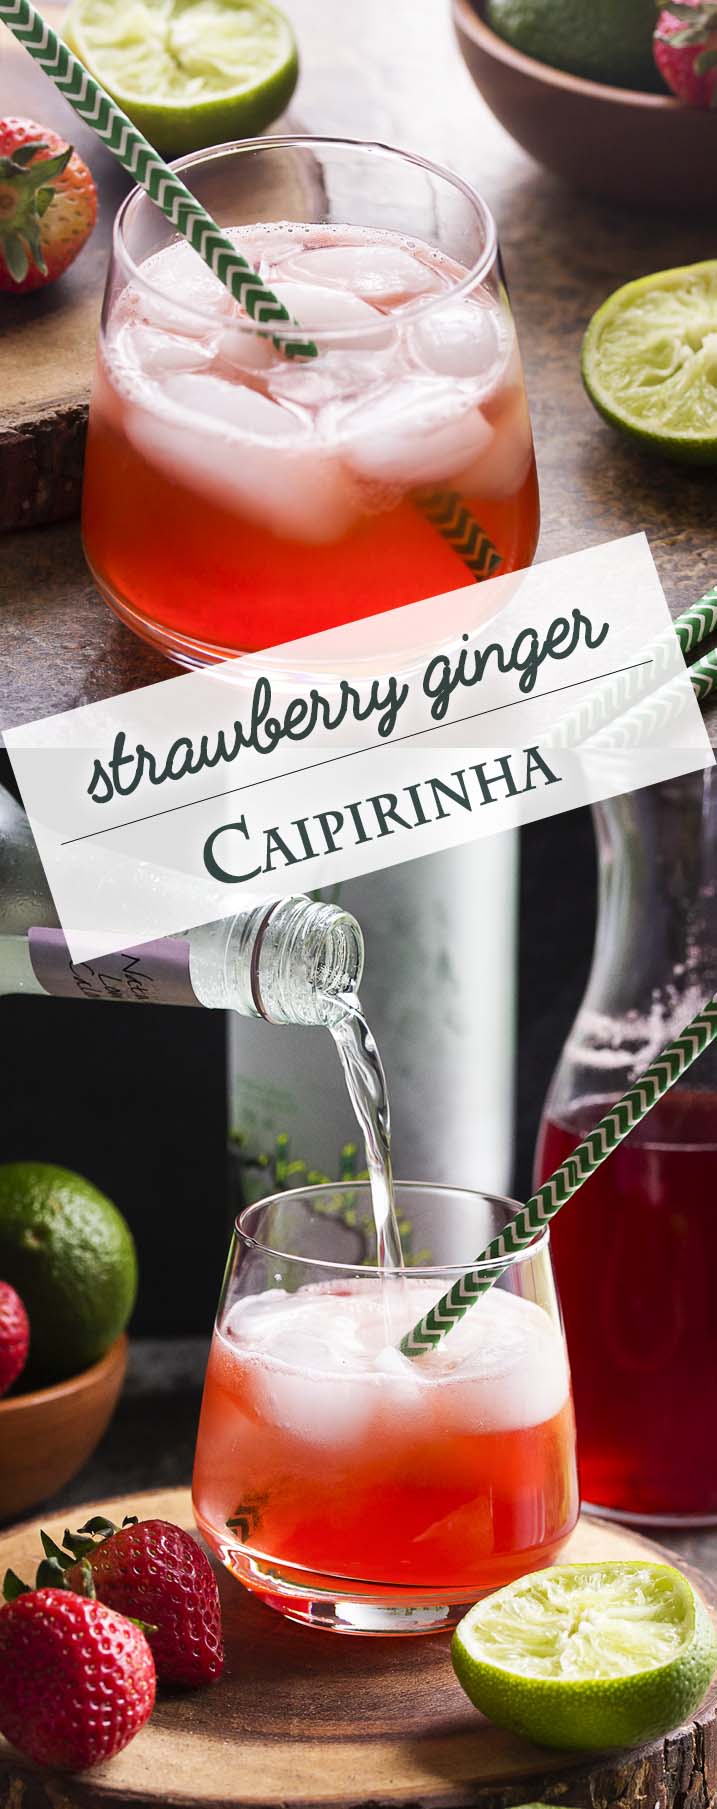 Homemade strawberry syrup topped with ginger beer makes this Brazilian strawberry caipirinha cocktail a refreshingly fruity fizzy drink perfect for summer! | justalittlebitofbacon.com